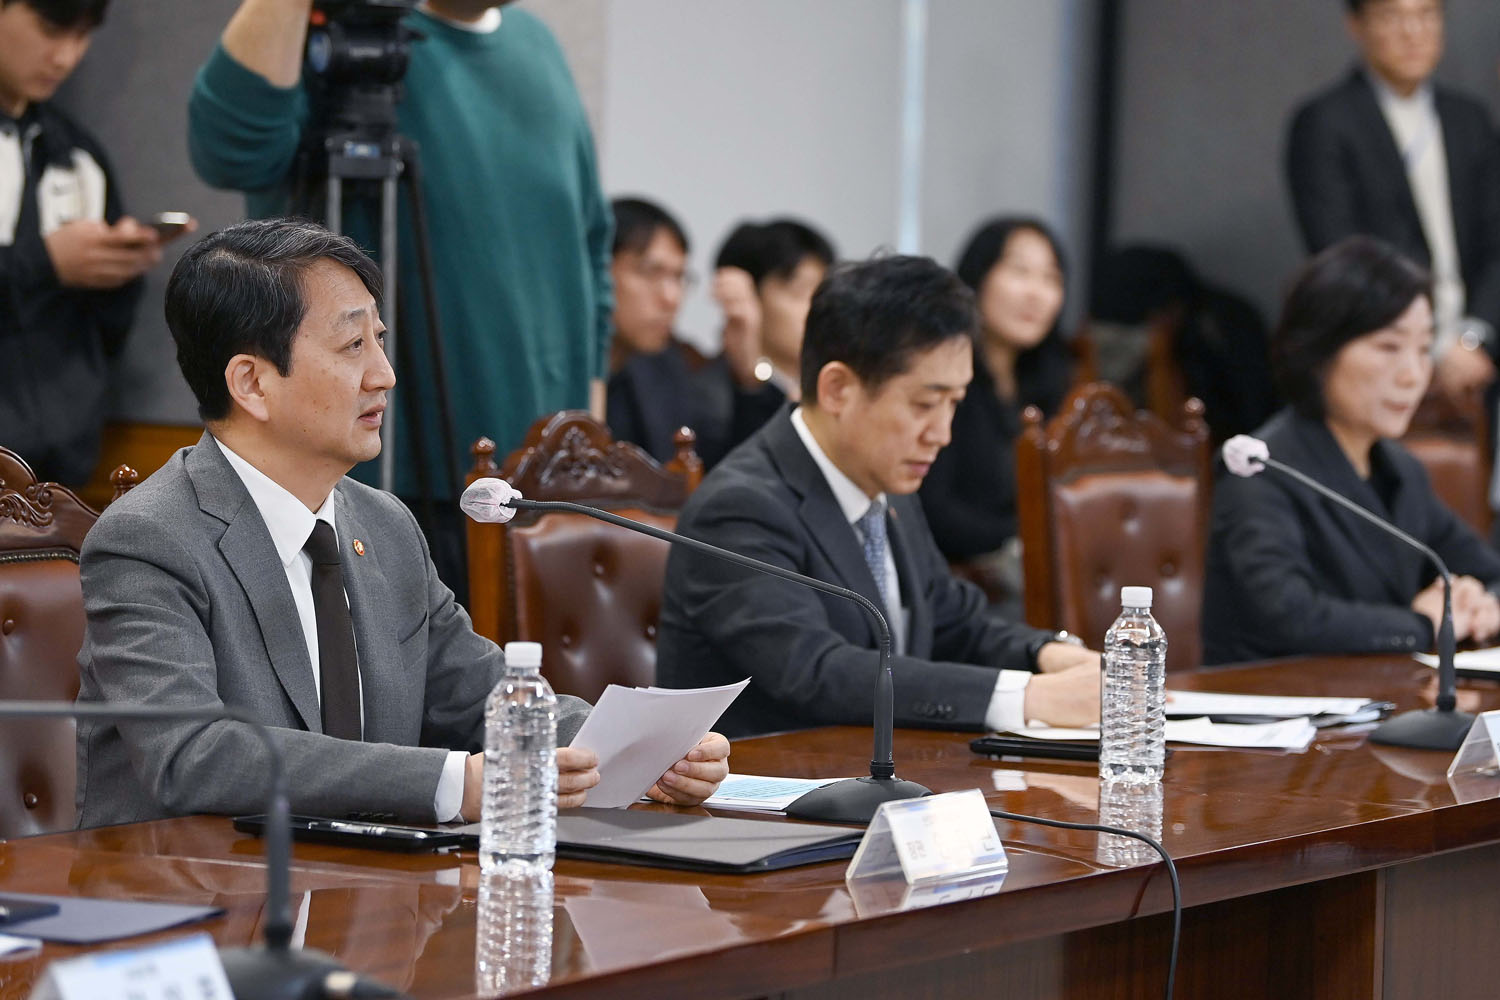 Minister Ahn attends conference on catered financing support for businesses